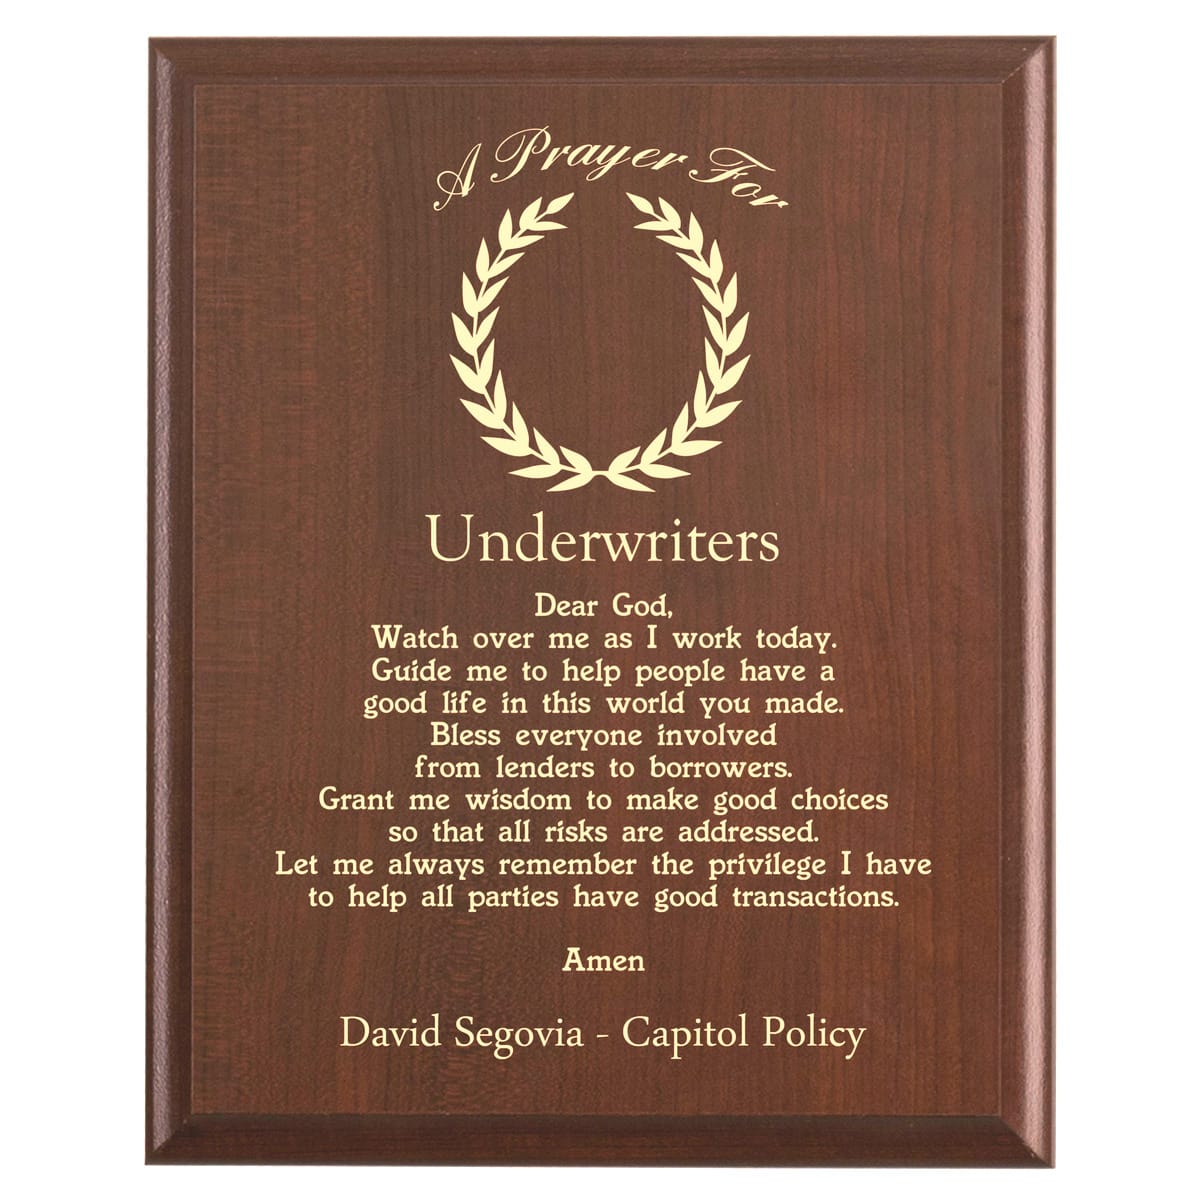 Plaque photo: Underwriter Prayer Plaque design with free personalization. Wood style finish with customized text.